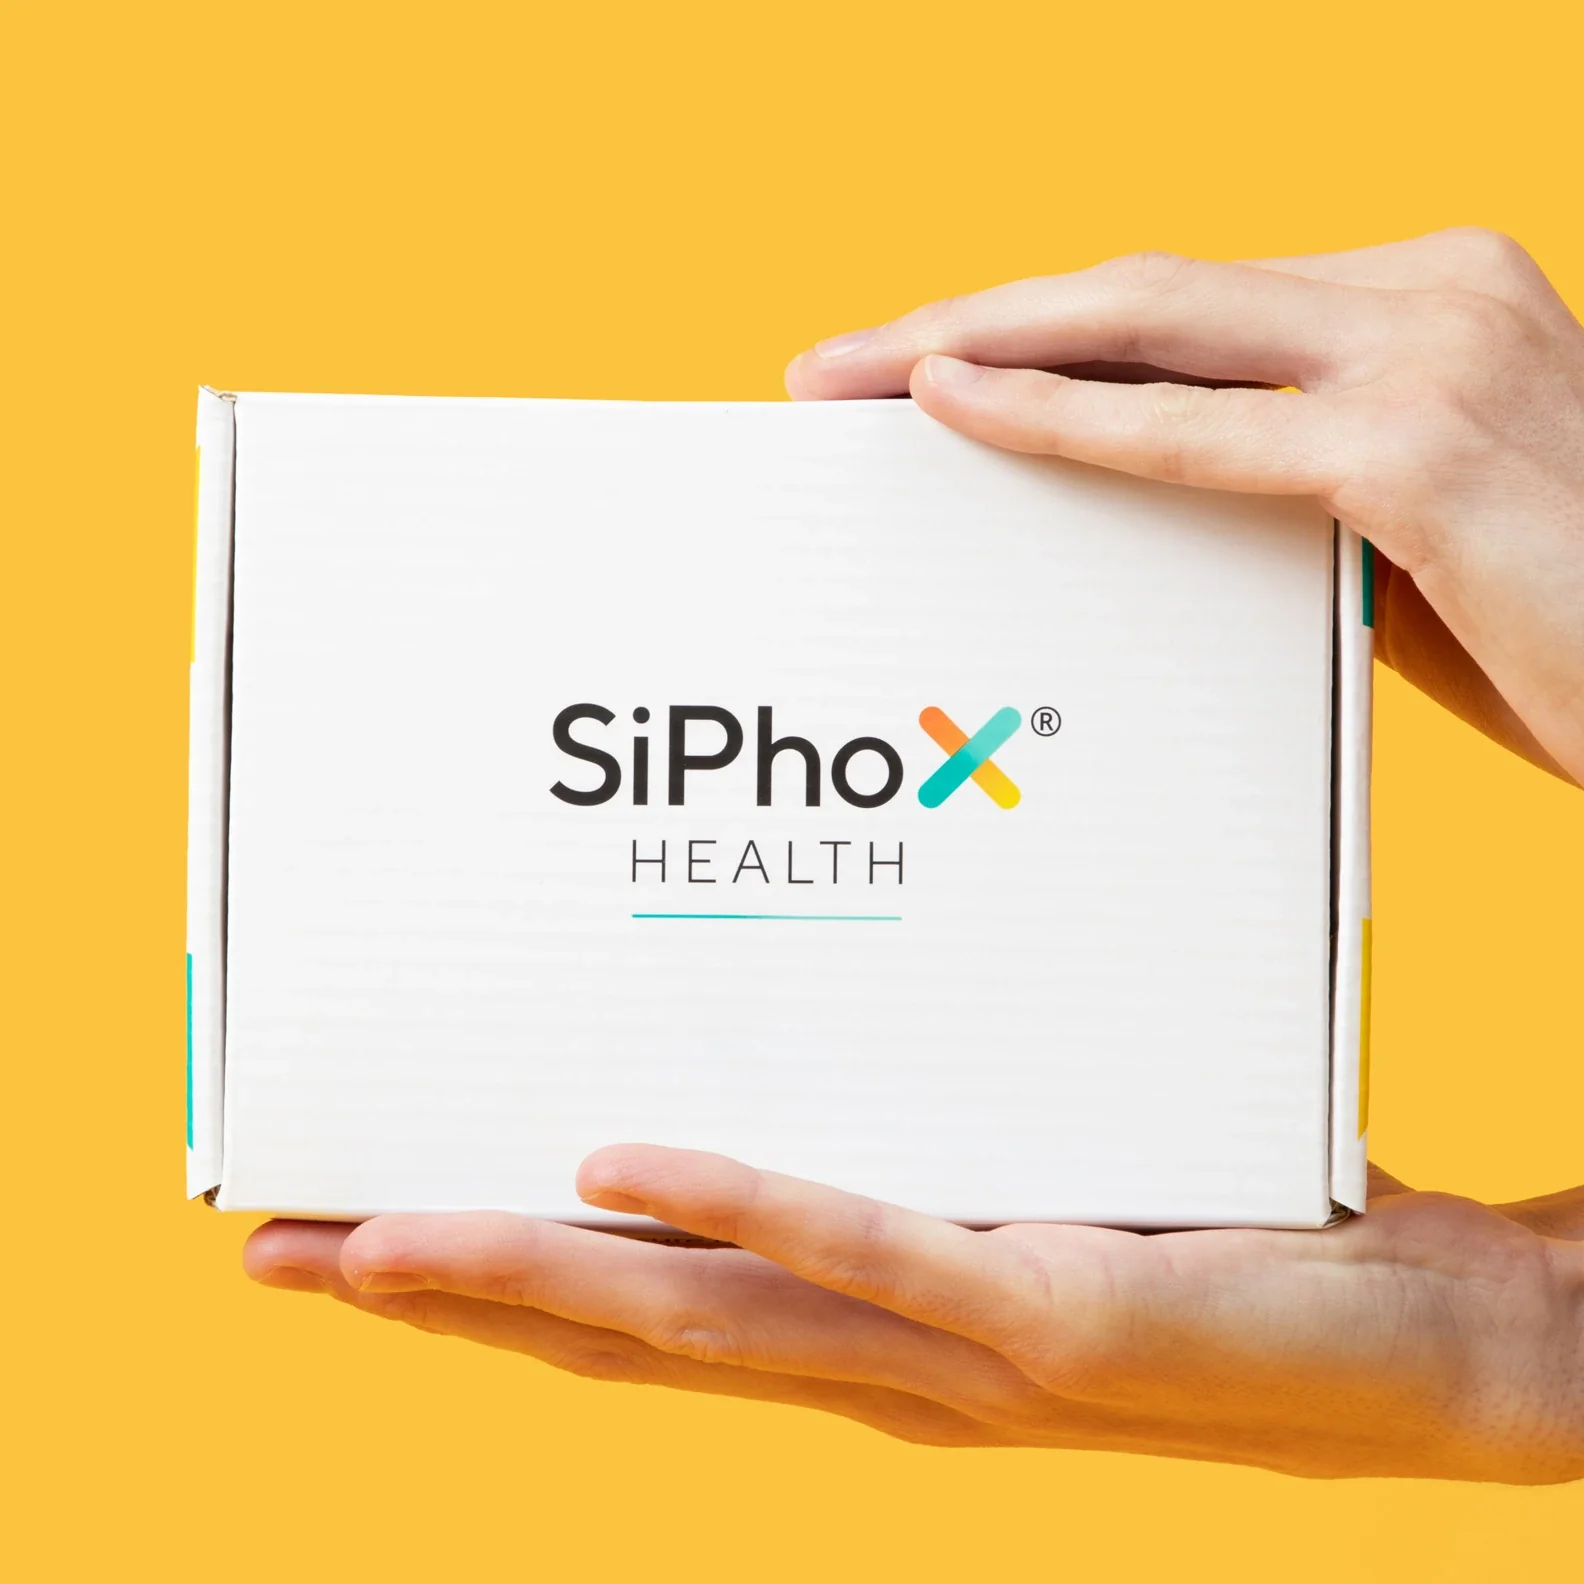 SiPhox Health Secures $27M for Lab-Grade Home Health Testing with Silicon Photonics